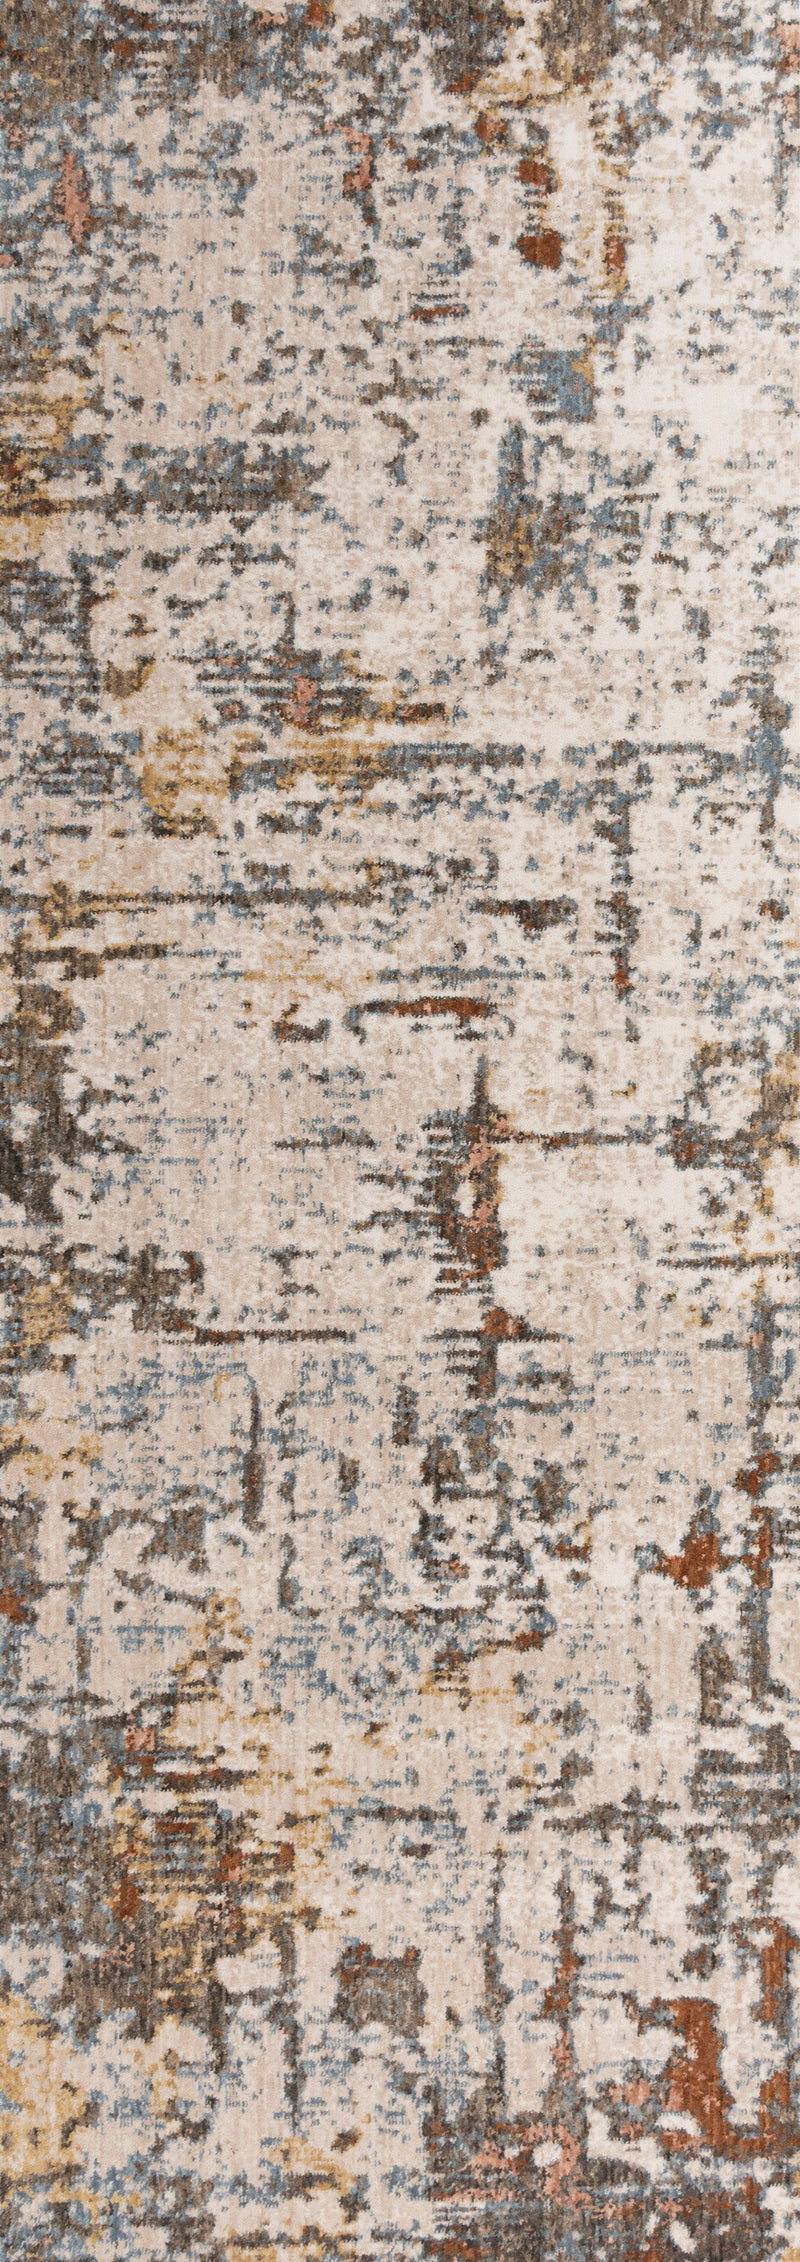 Rug Depot Home Area Rugs Jasper Area Rugs JAS739 Multi in 19 Sizes Hand Washed and Hand Finished